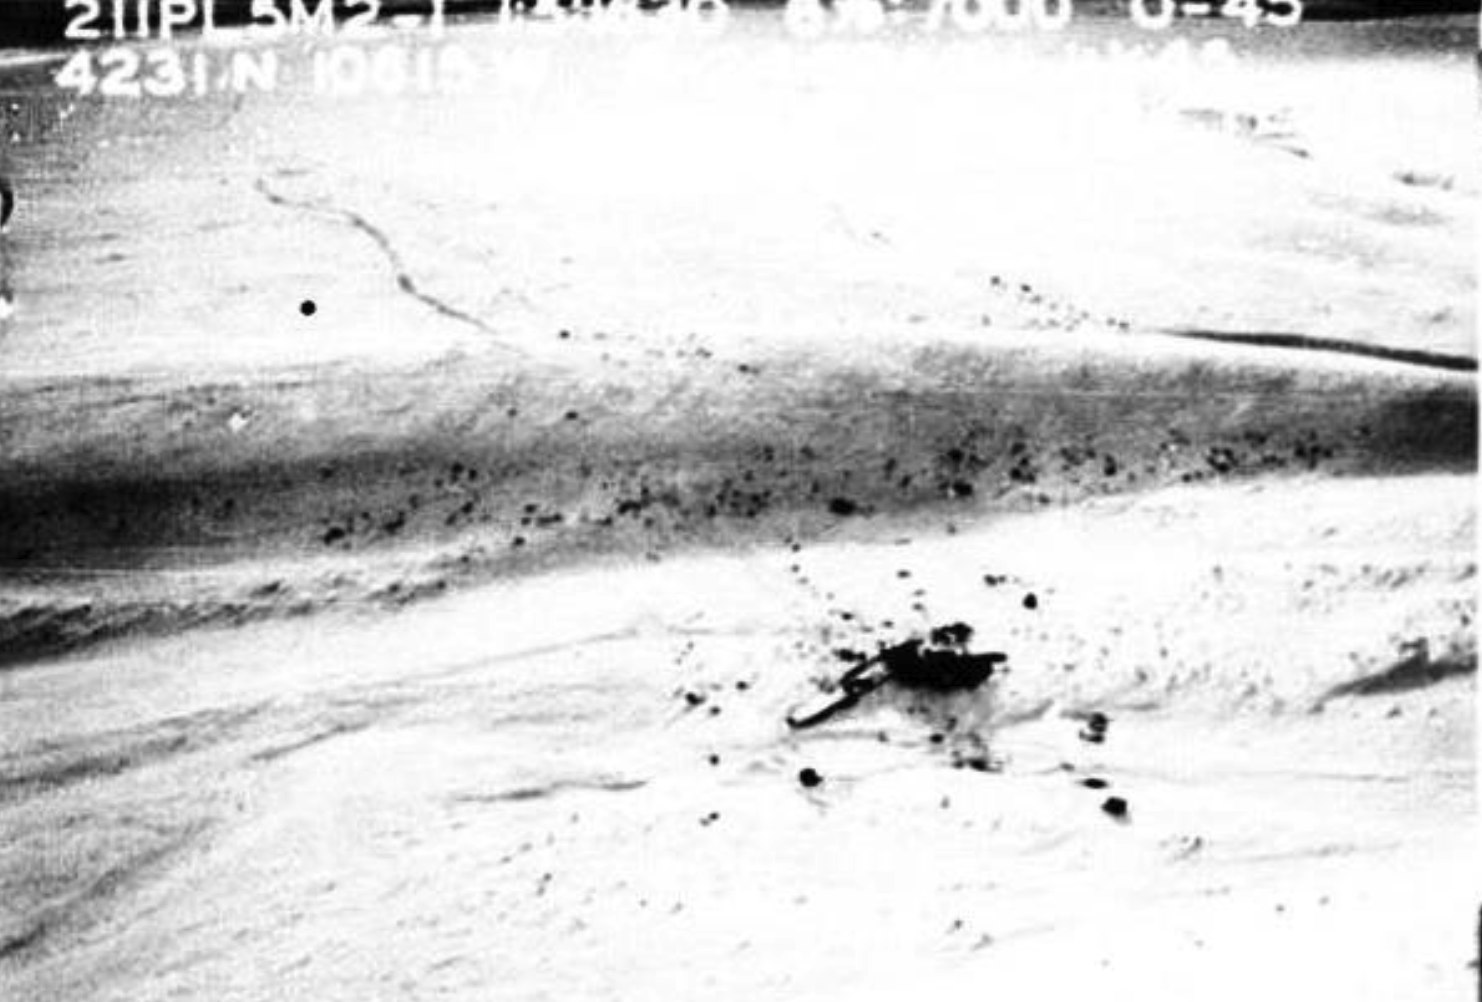 An aerial photo of the crash site in 1945 helped Mark Milliken develop a strategy using Google Earth to locate the crash site.